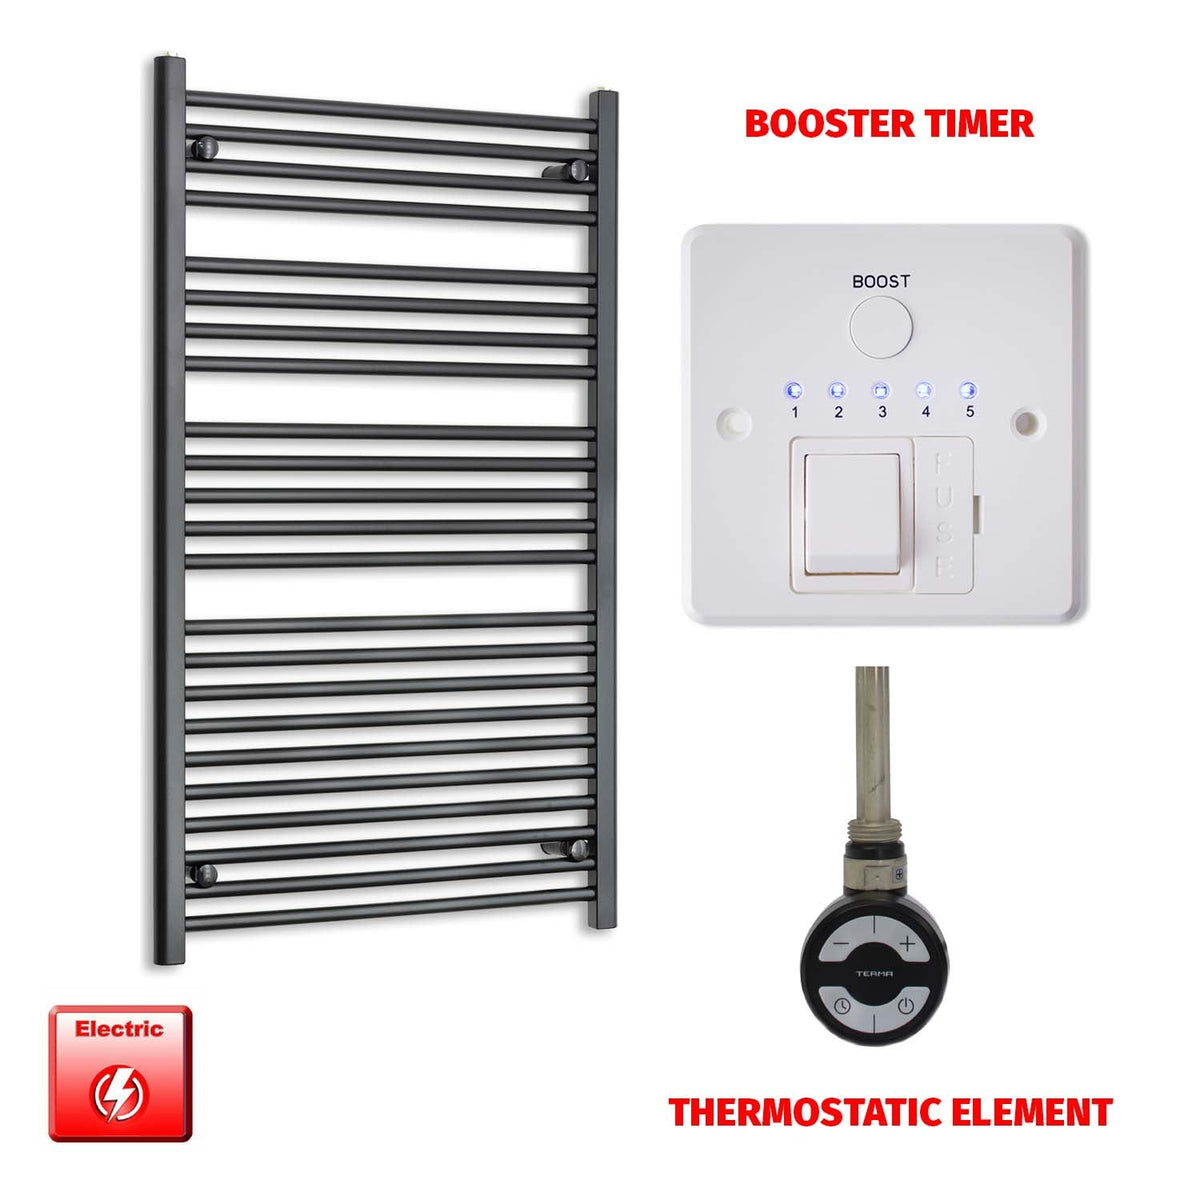 1200mm High 700mm Wide Flat Black Pre-Filled Electric Heated Towel Rail Radiator HTR MOA Thermostatic Booster Timer